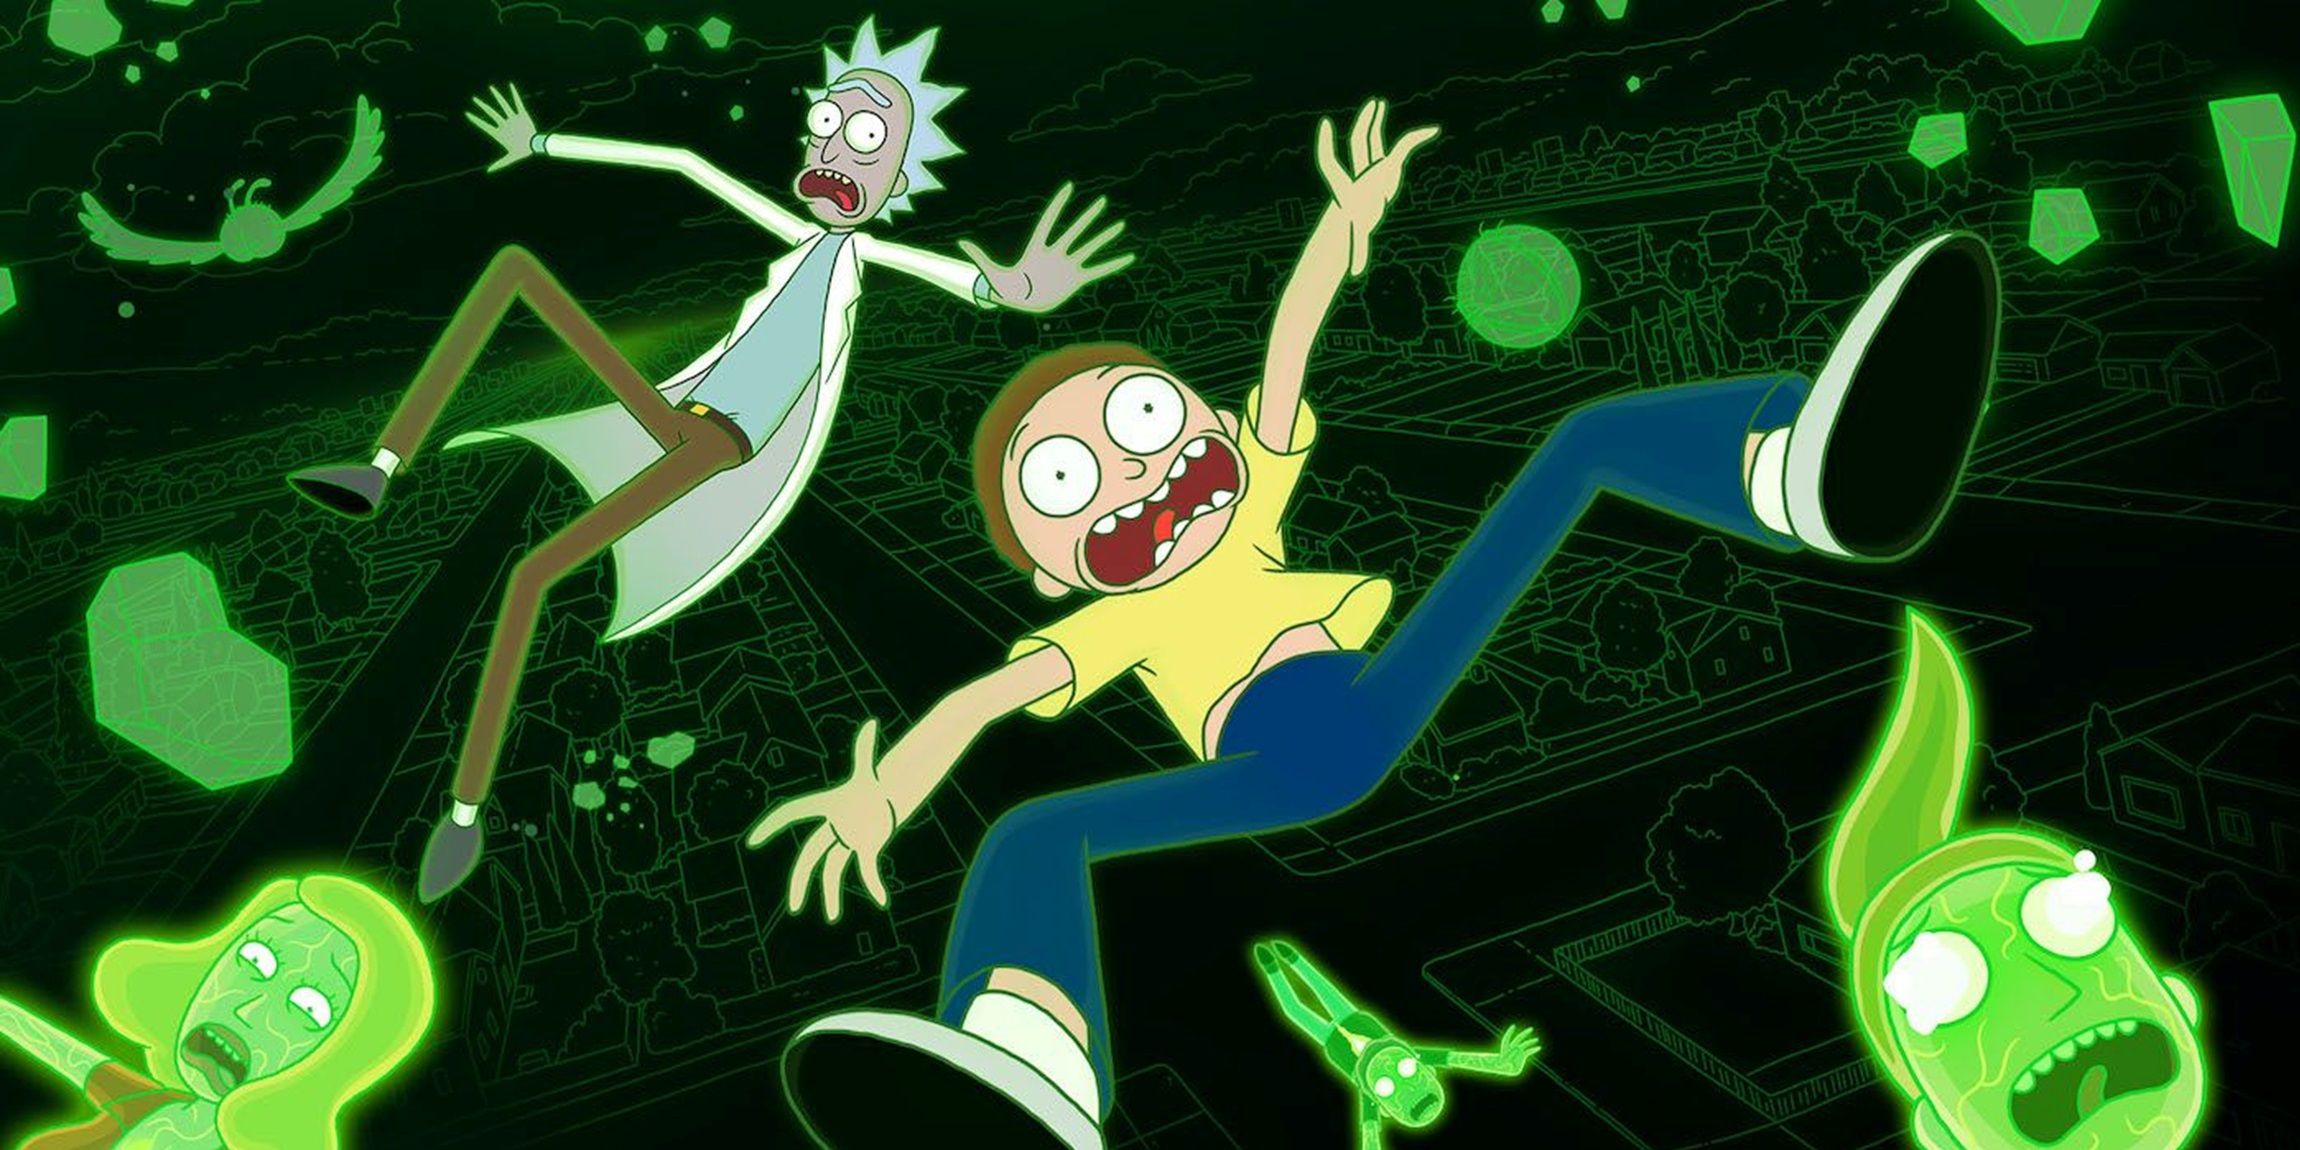 The poster for Rick and Morty season 6